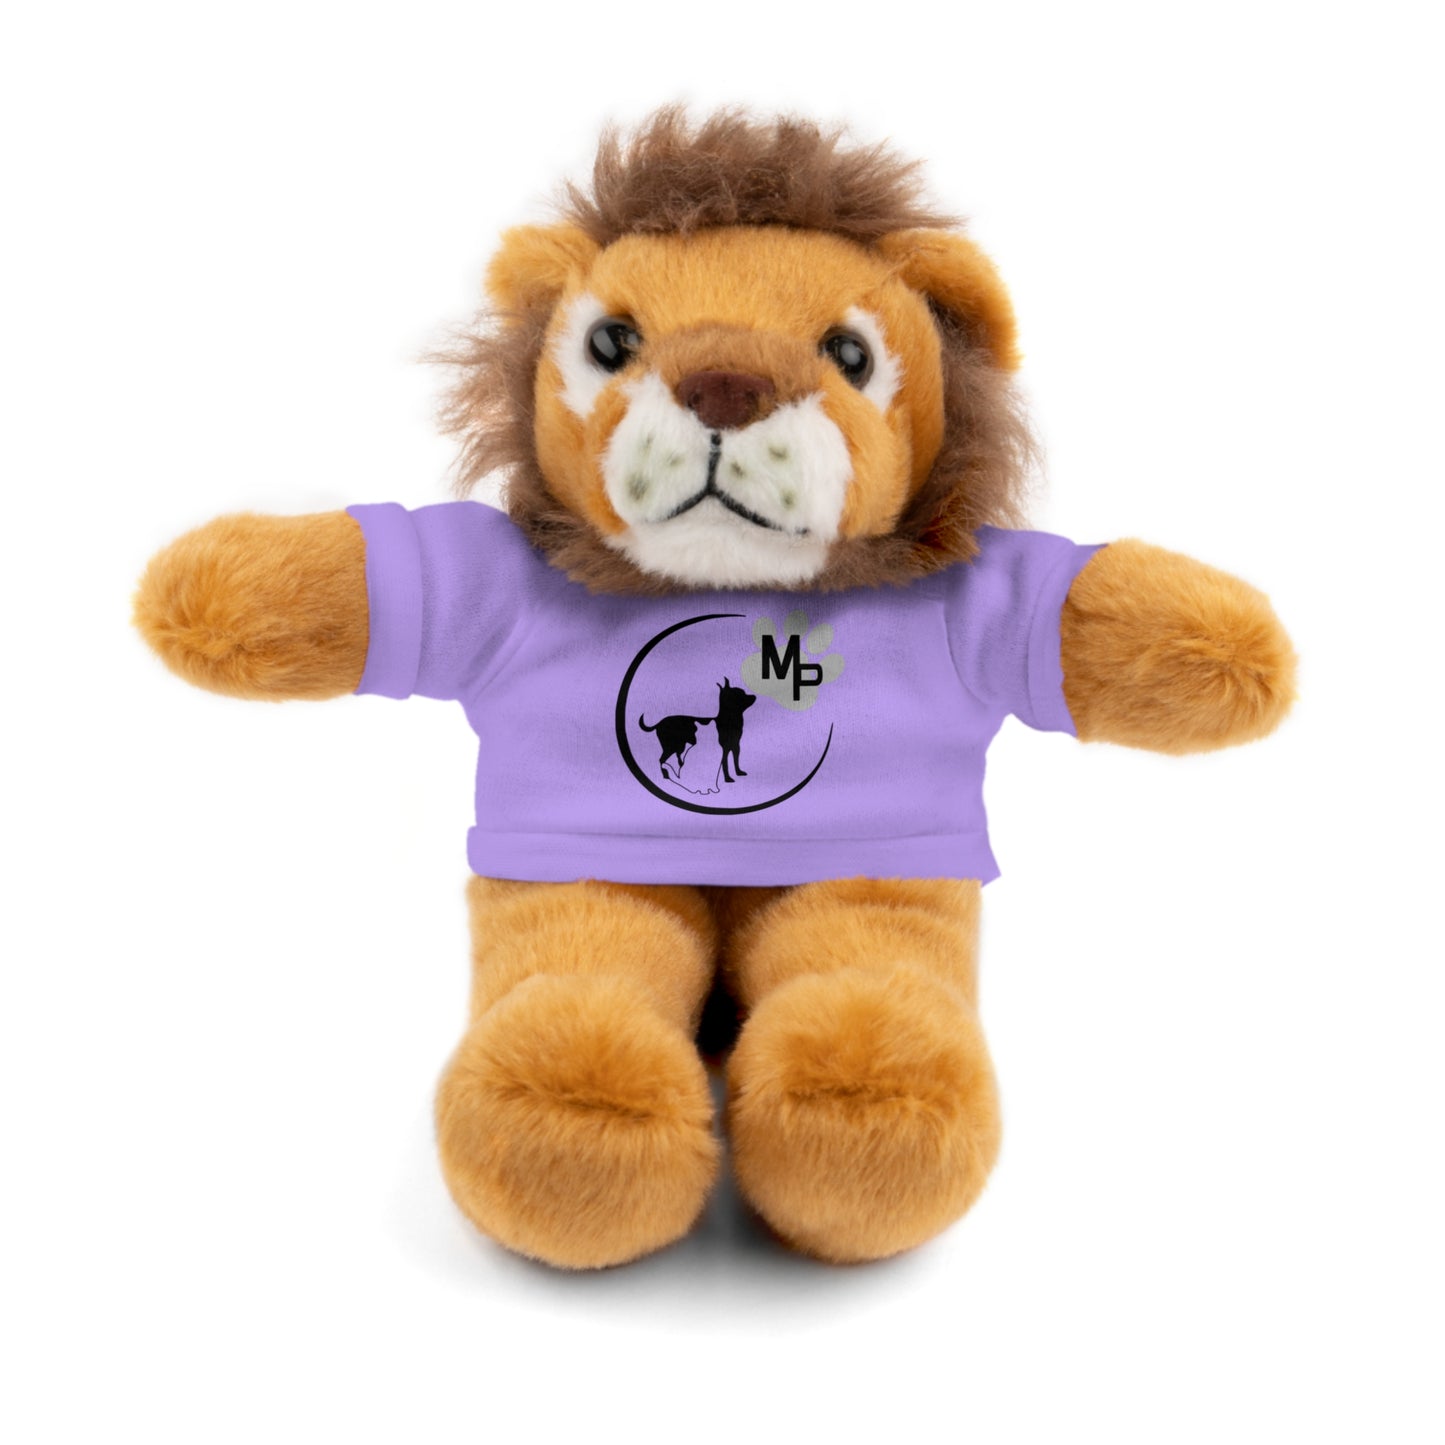 Monkey's Pack Stuffed Animals with Tee (multiple animals and colors to choose from)